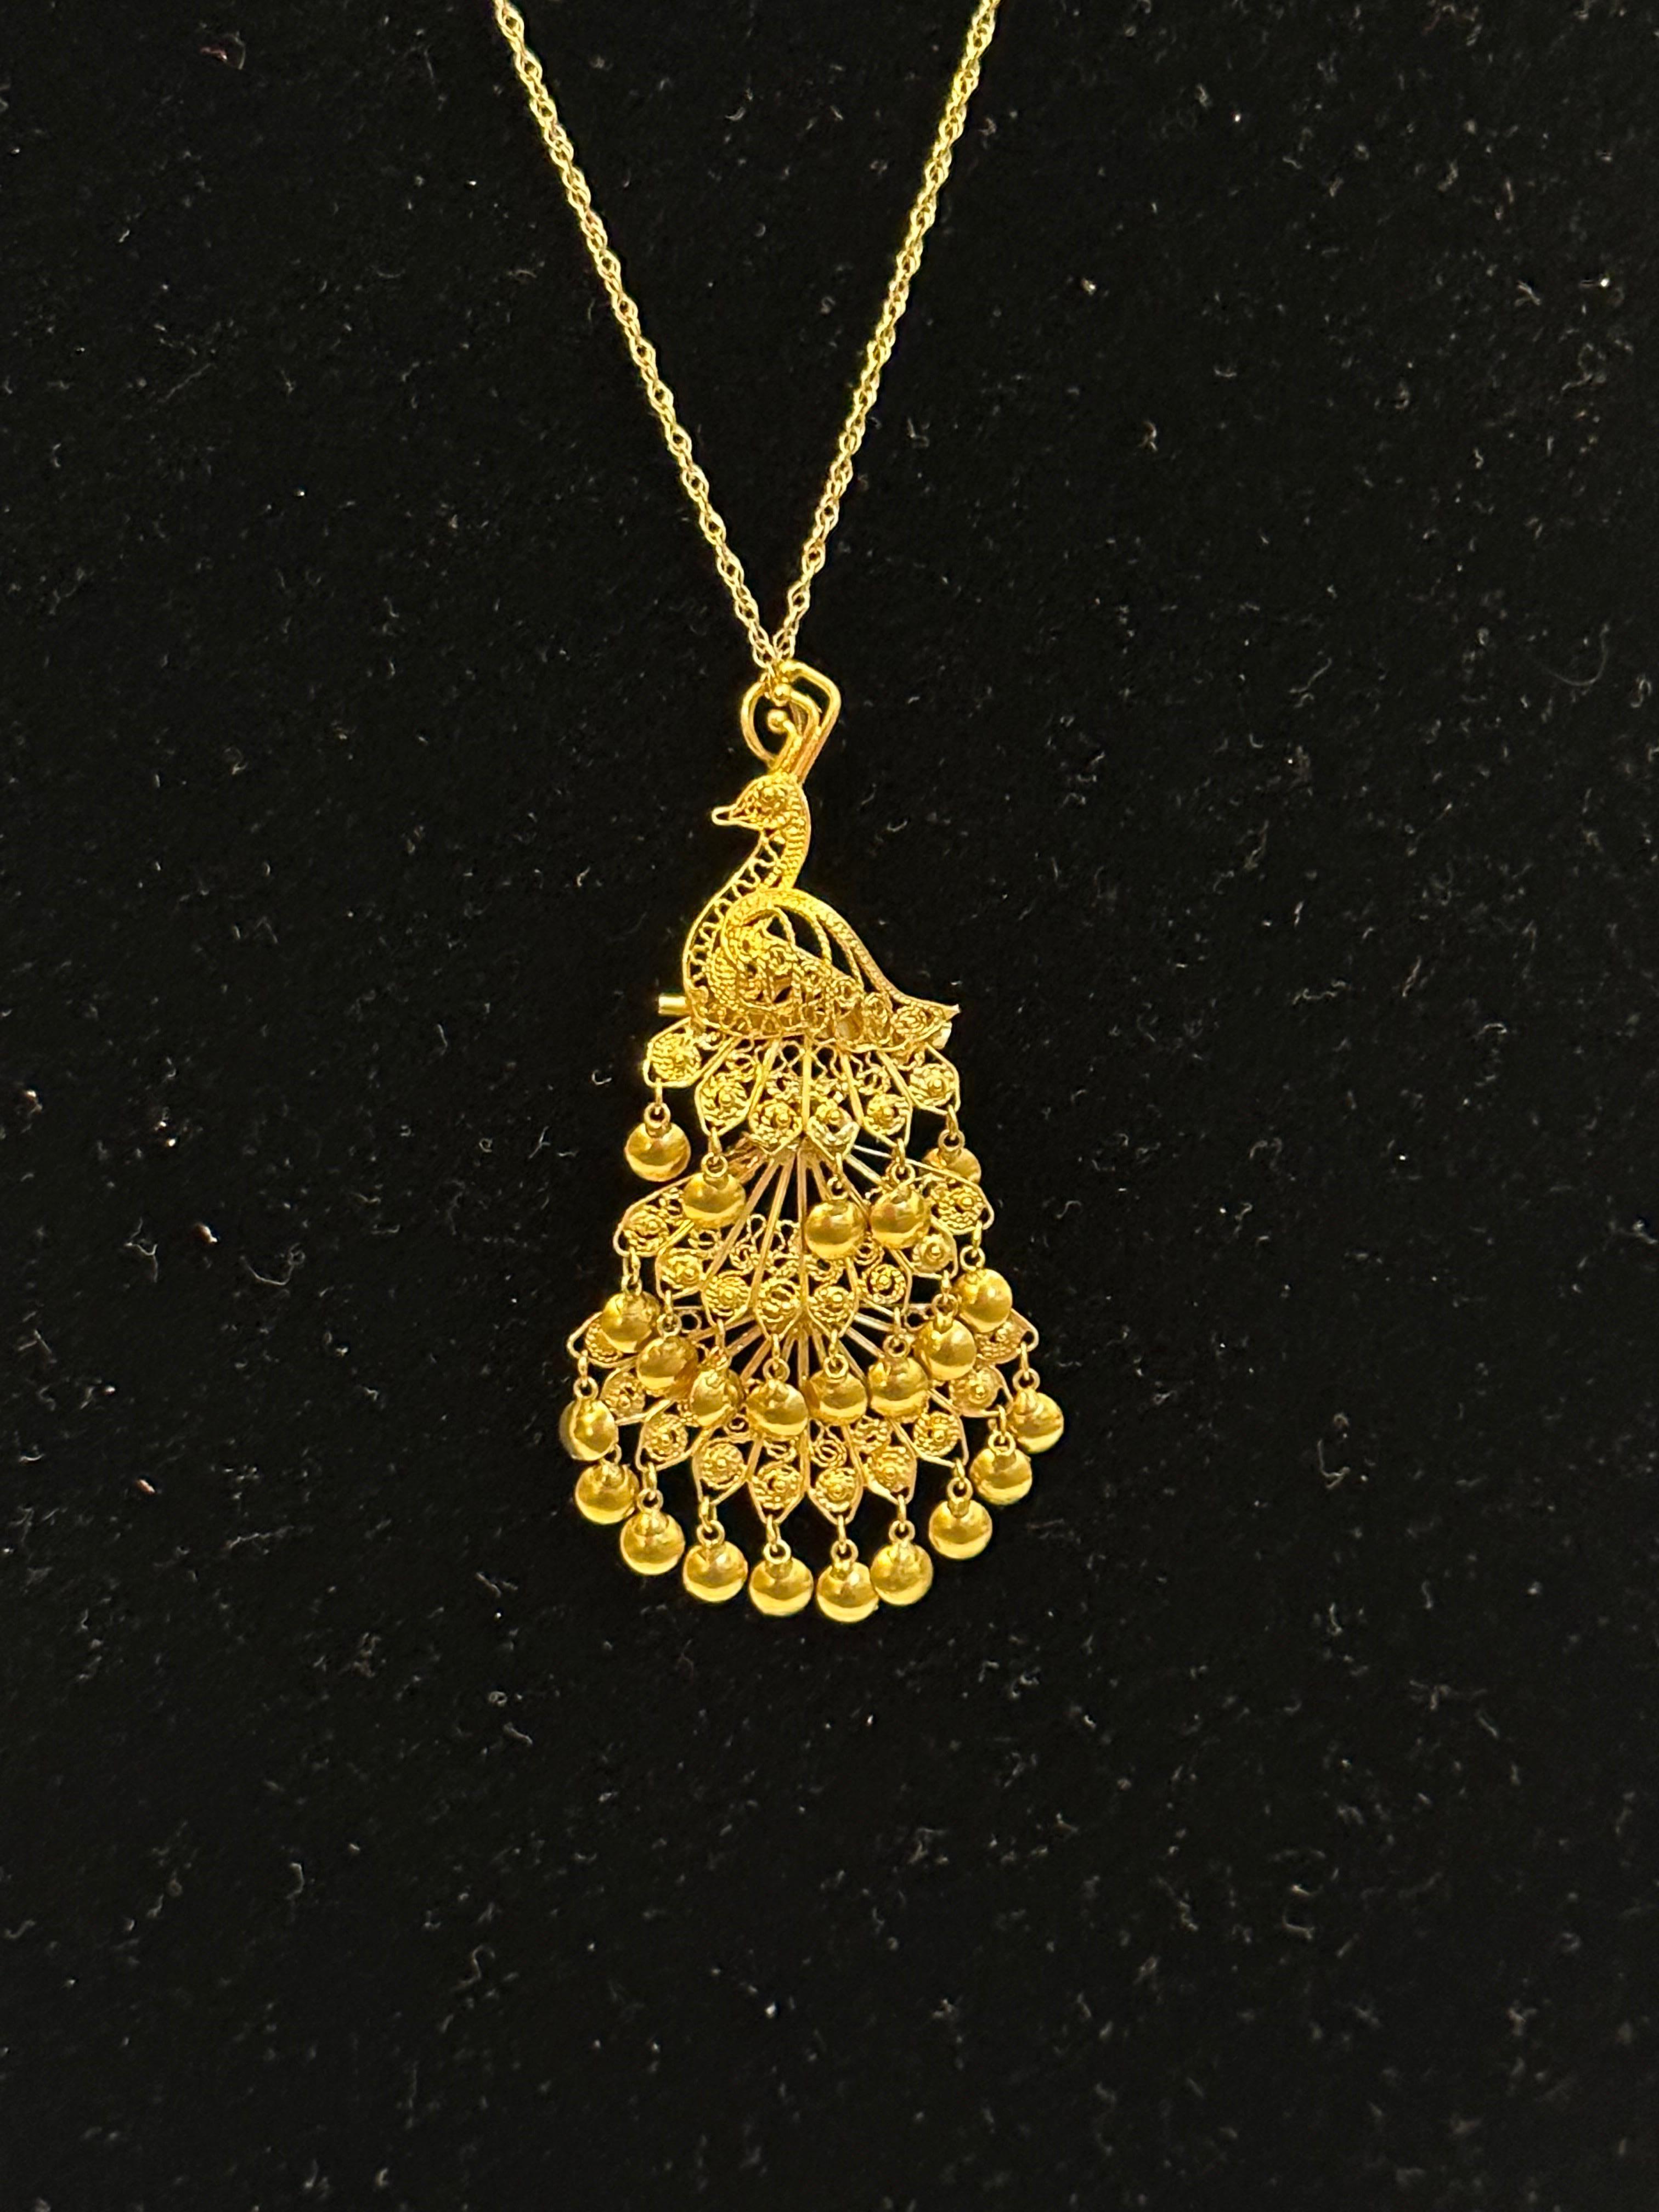 Vintage 24 Kt Yellow Gold 3.4 Gm Peacock Pin / Pendant + 14 K Chain Necklace 1